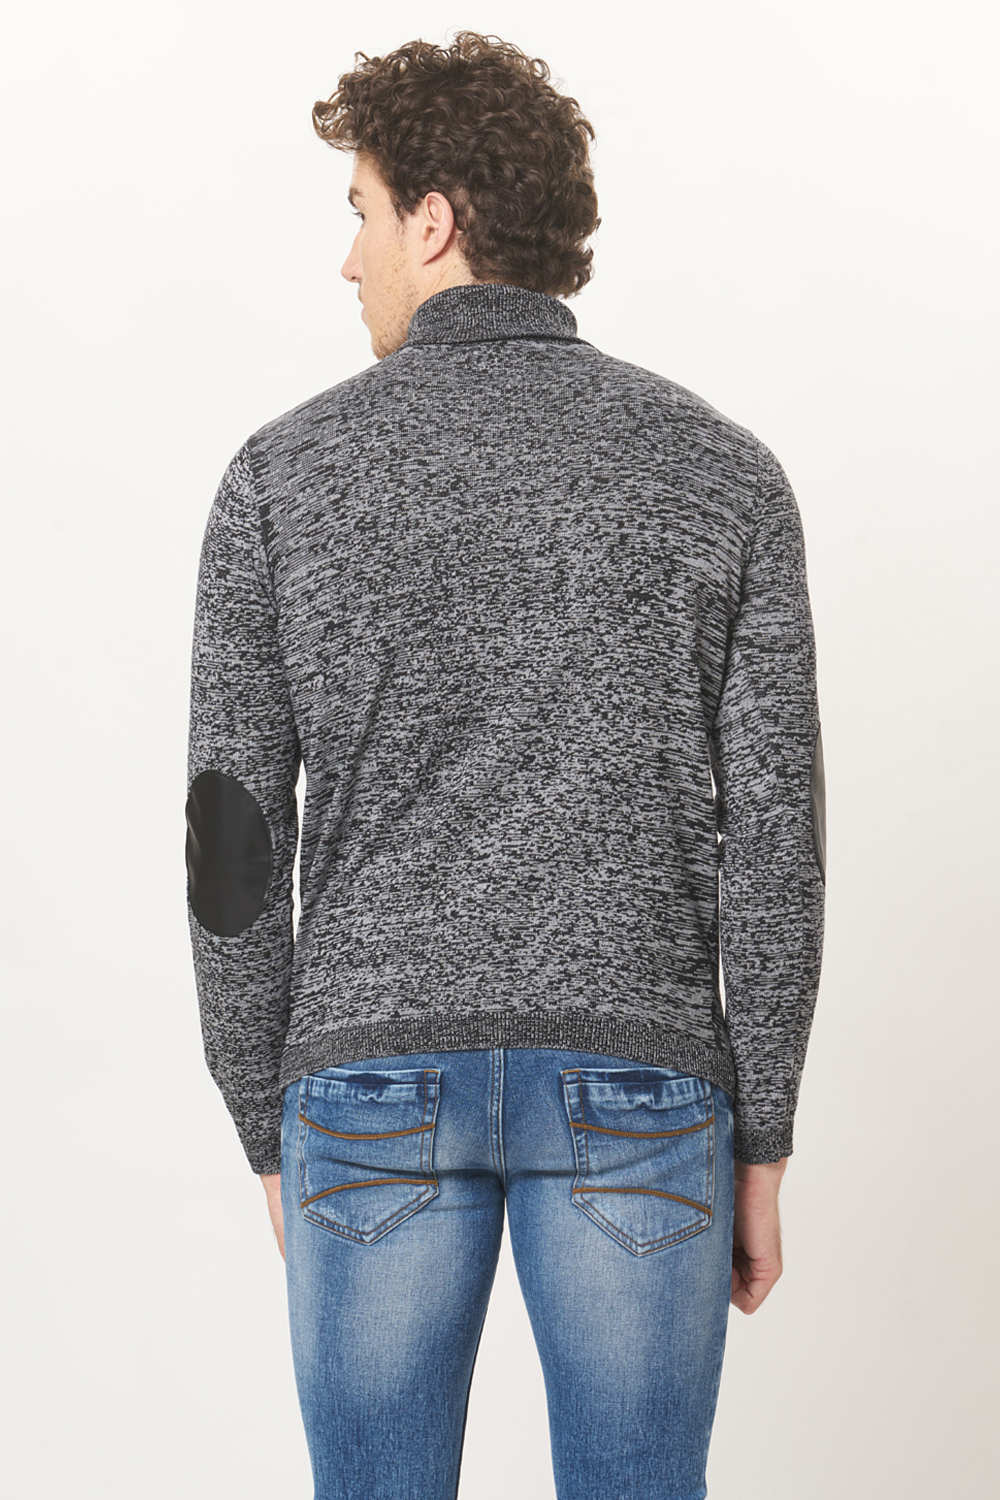 BASICS MUSCLE FIT TURTLE NECK SWEATER